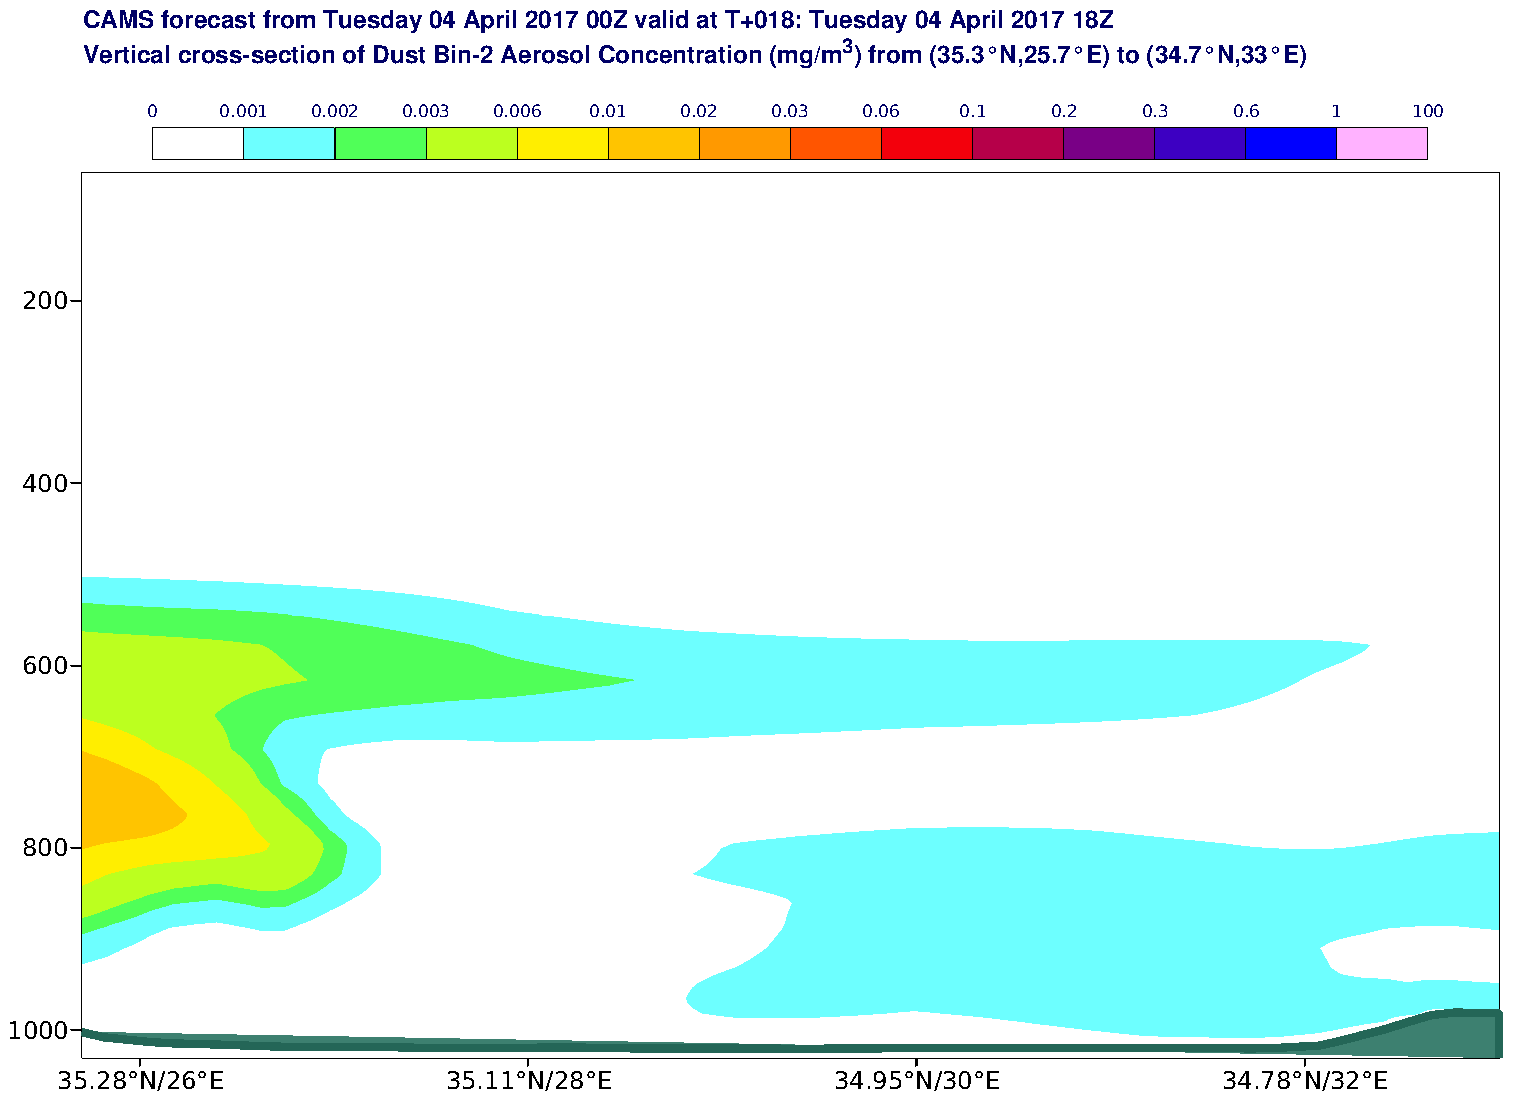 Vertical cross-section of Dust Bin-2 Aerosol Concentration (mg/m3) valid at T18 - 2017-04-04 18:00